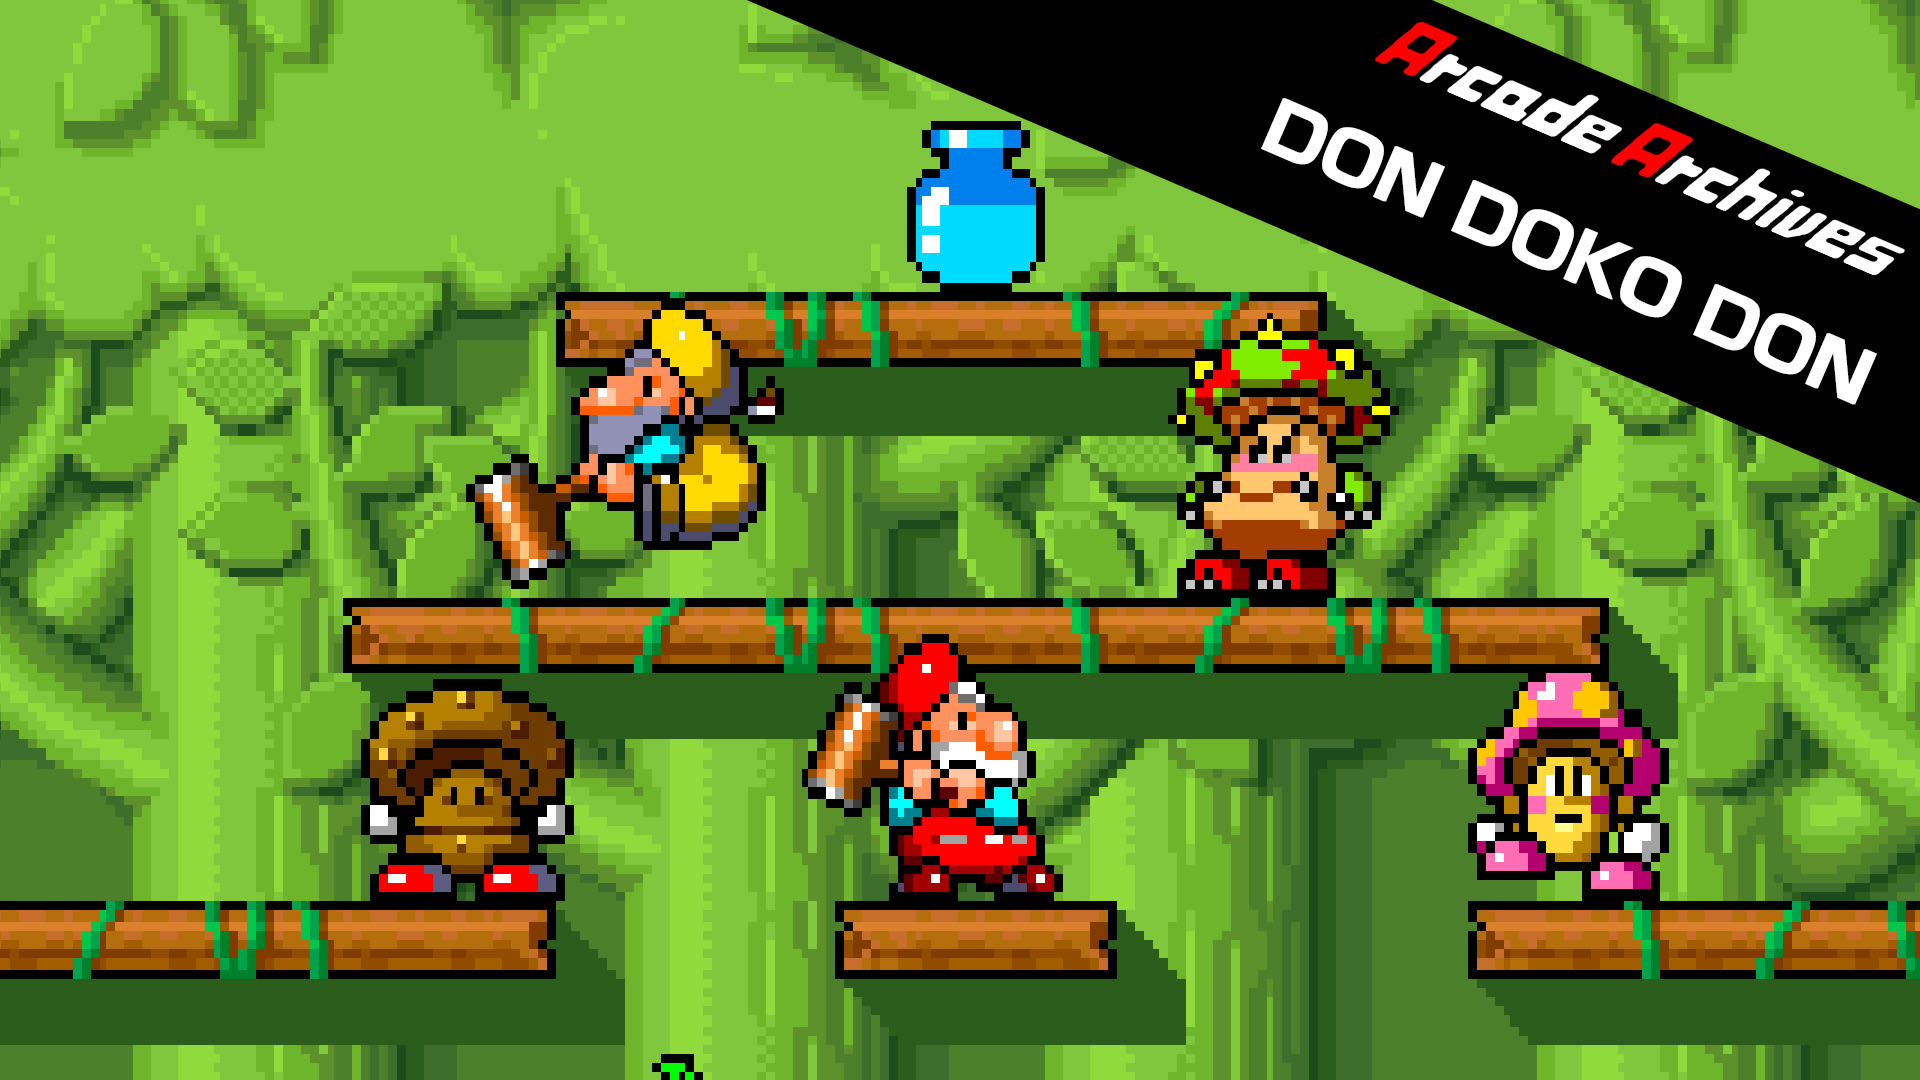 Arcade Archives DON DOKO DON 1